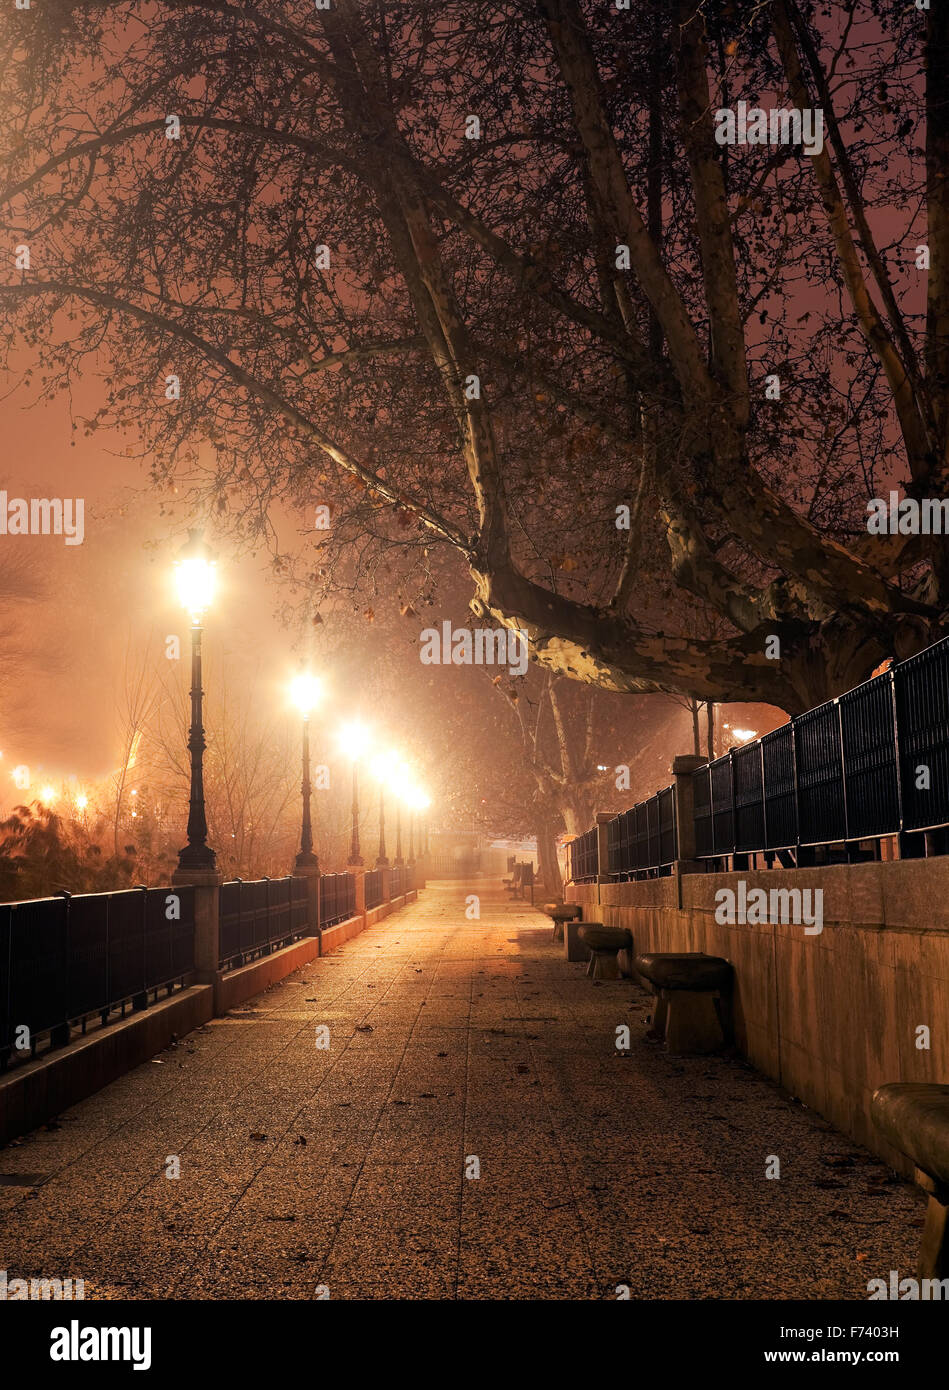 Walk with street lamps at night cityscape Stock Photo